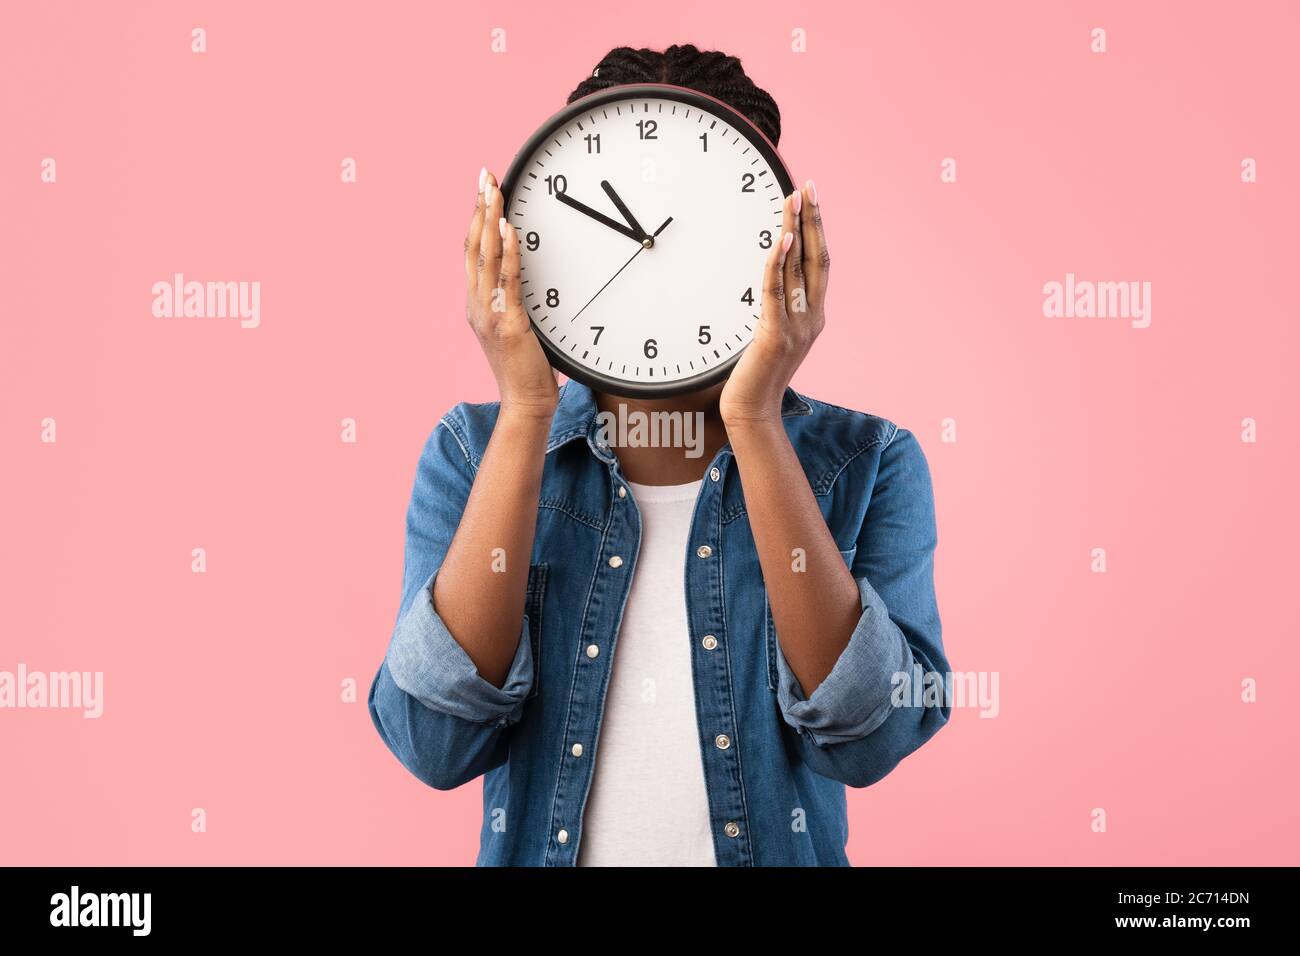 African Girl Holding Clock In Front Of Face, Pink Background Stock Photo